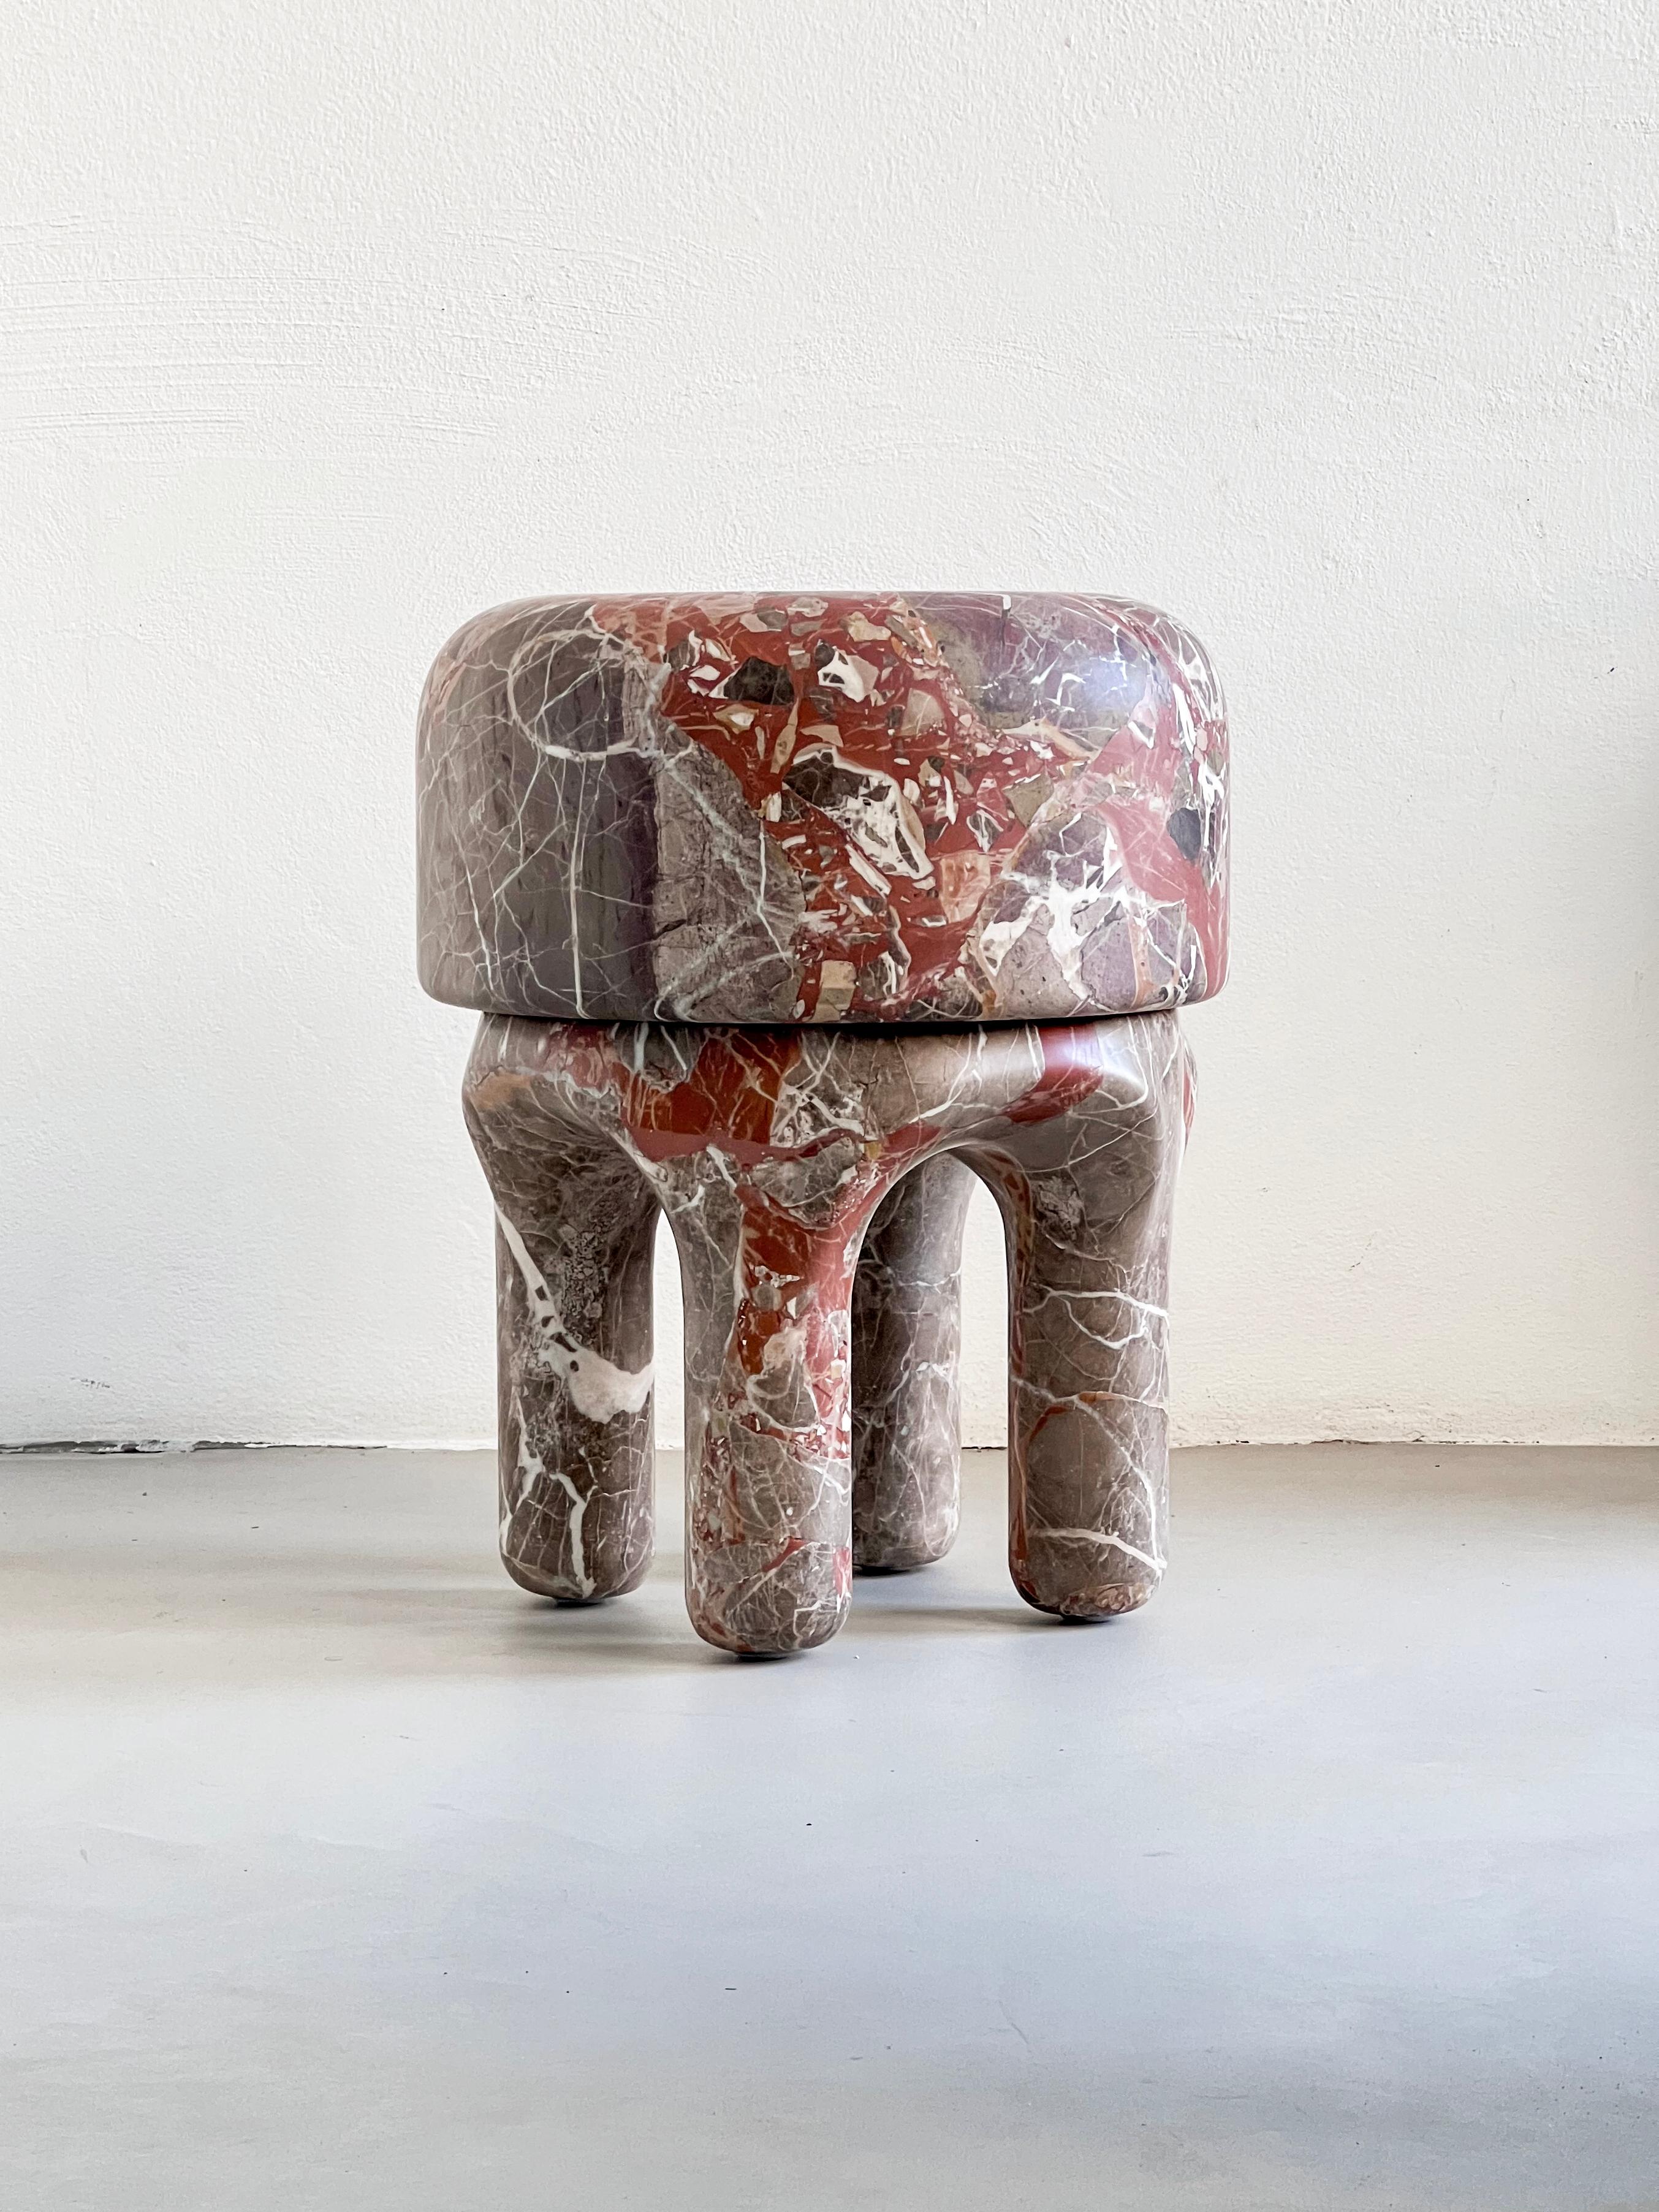 Marble Sculpture - Collectible side table - Sculptural Stool - Italian Design

Spinzi�’s dream of jellyfishes swimming in the waters of lake Como came to life in Medusa, shaping marble pieces into the sinuous elegance of these mesmerizing creatures.